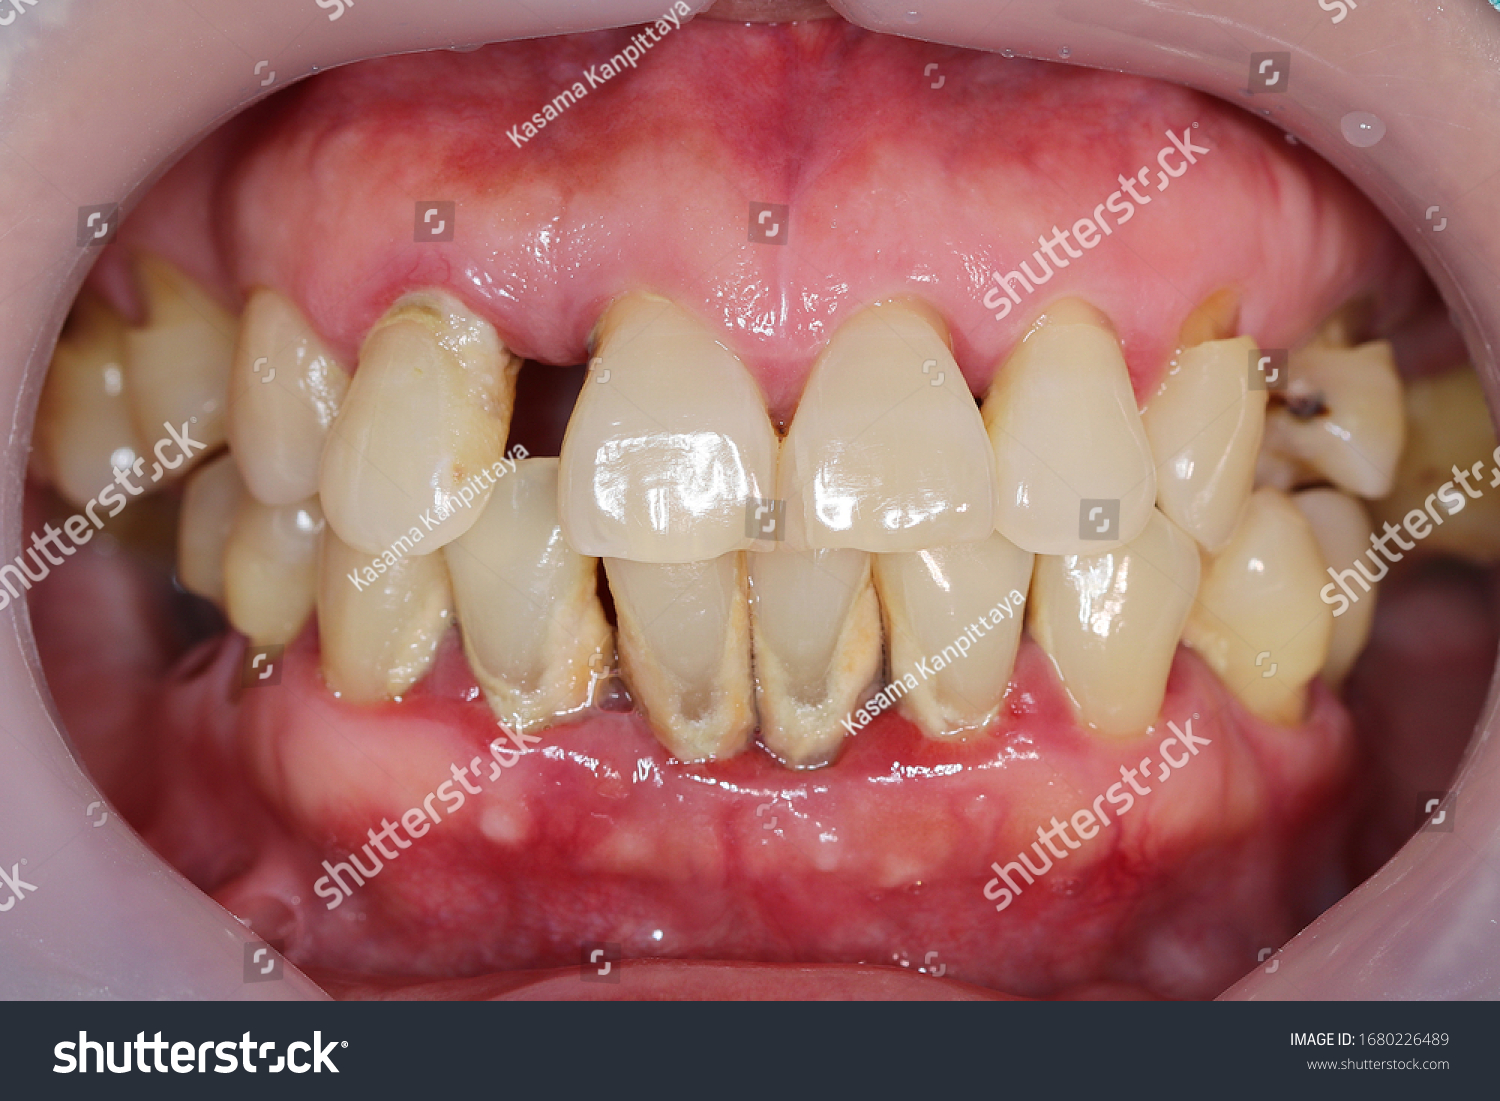 Periodontitis is often known as 'Gum Disease' and is a very common condition in which the gums and deeper periodontal structures become inflamed. #1680226489